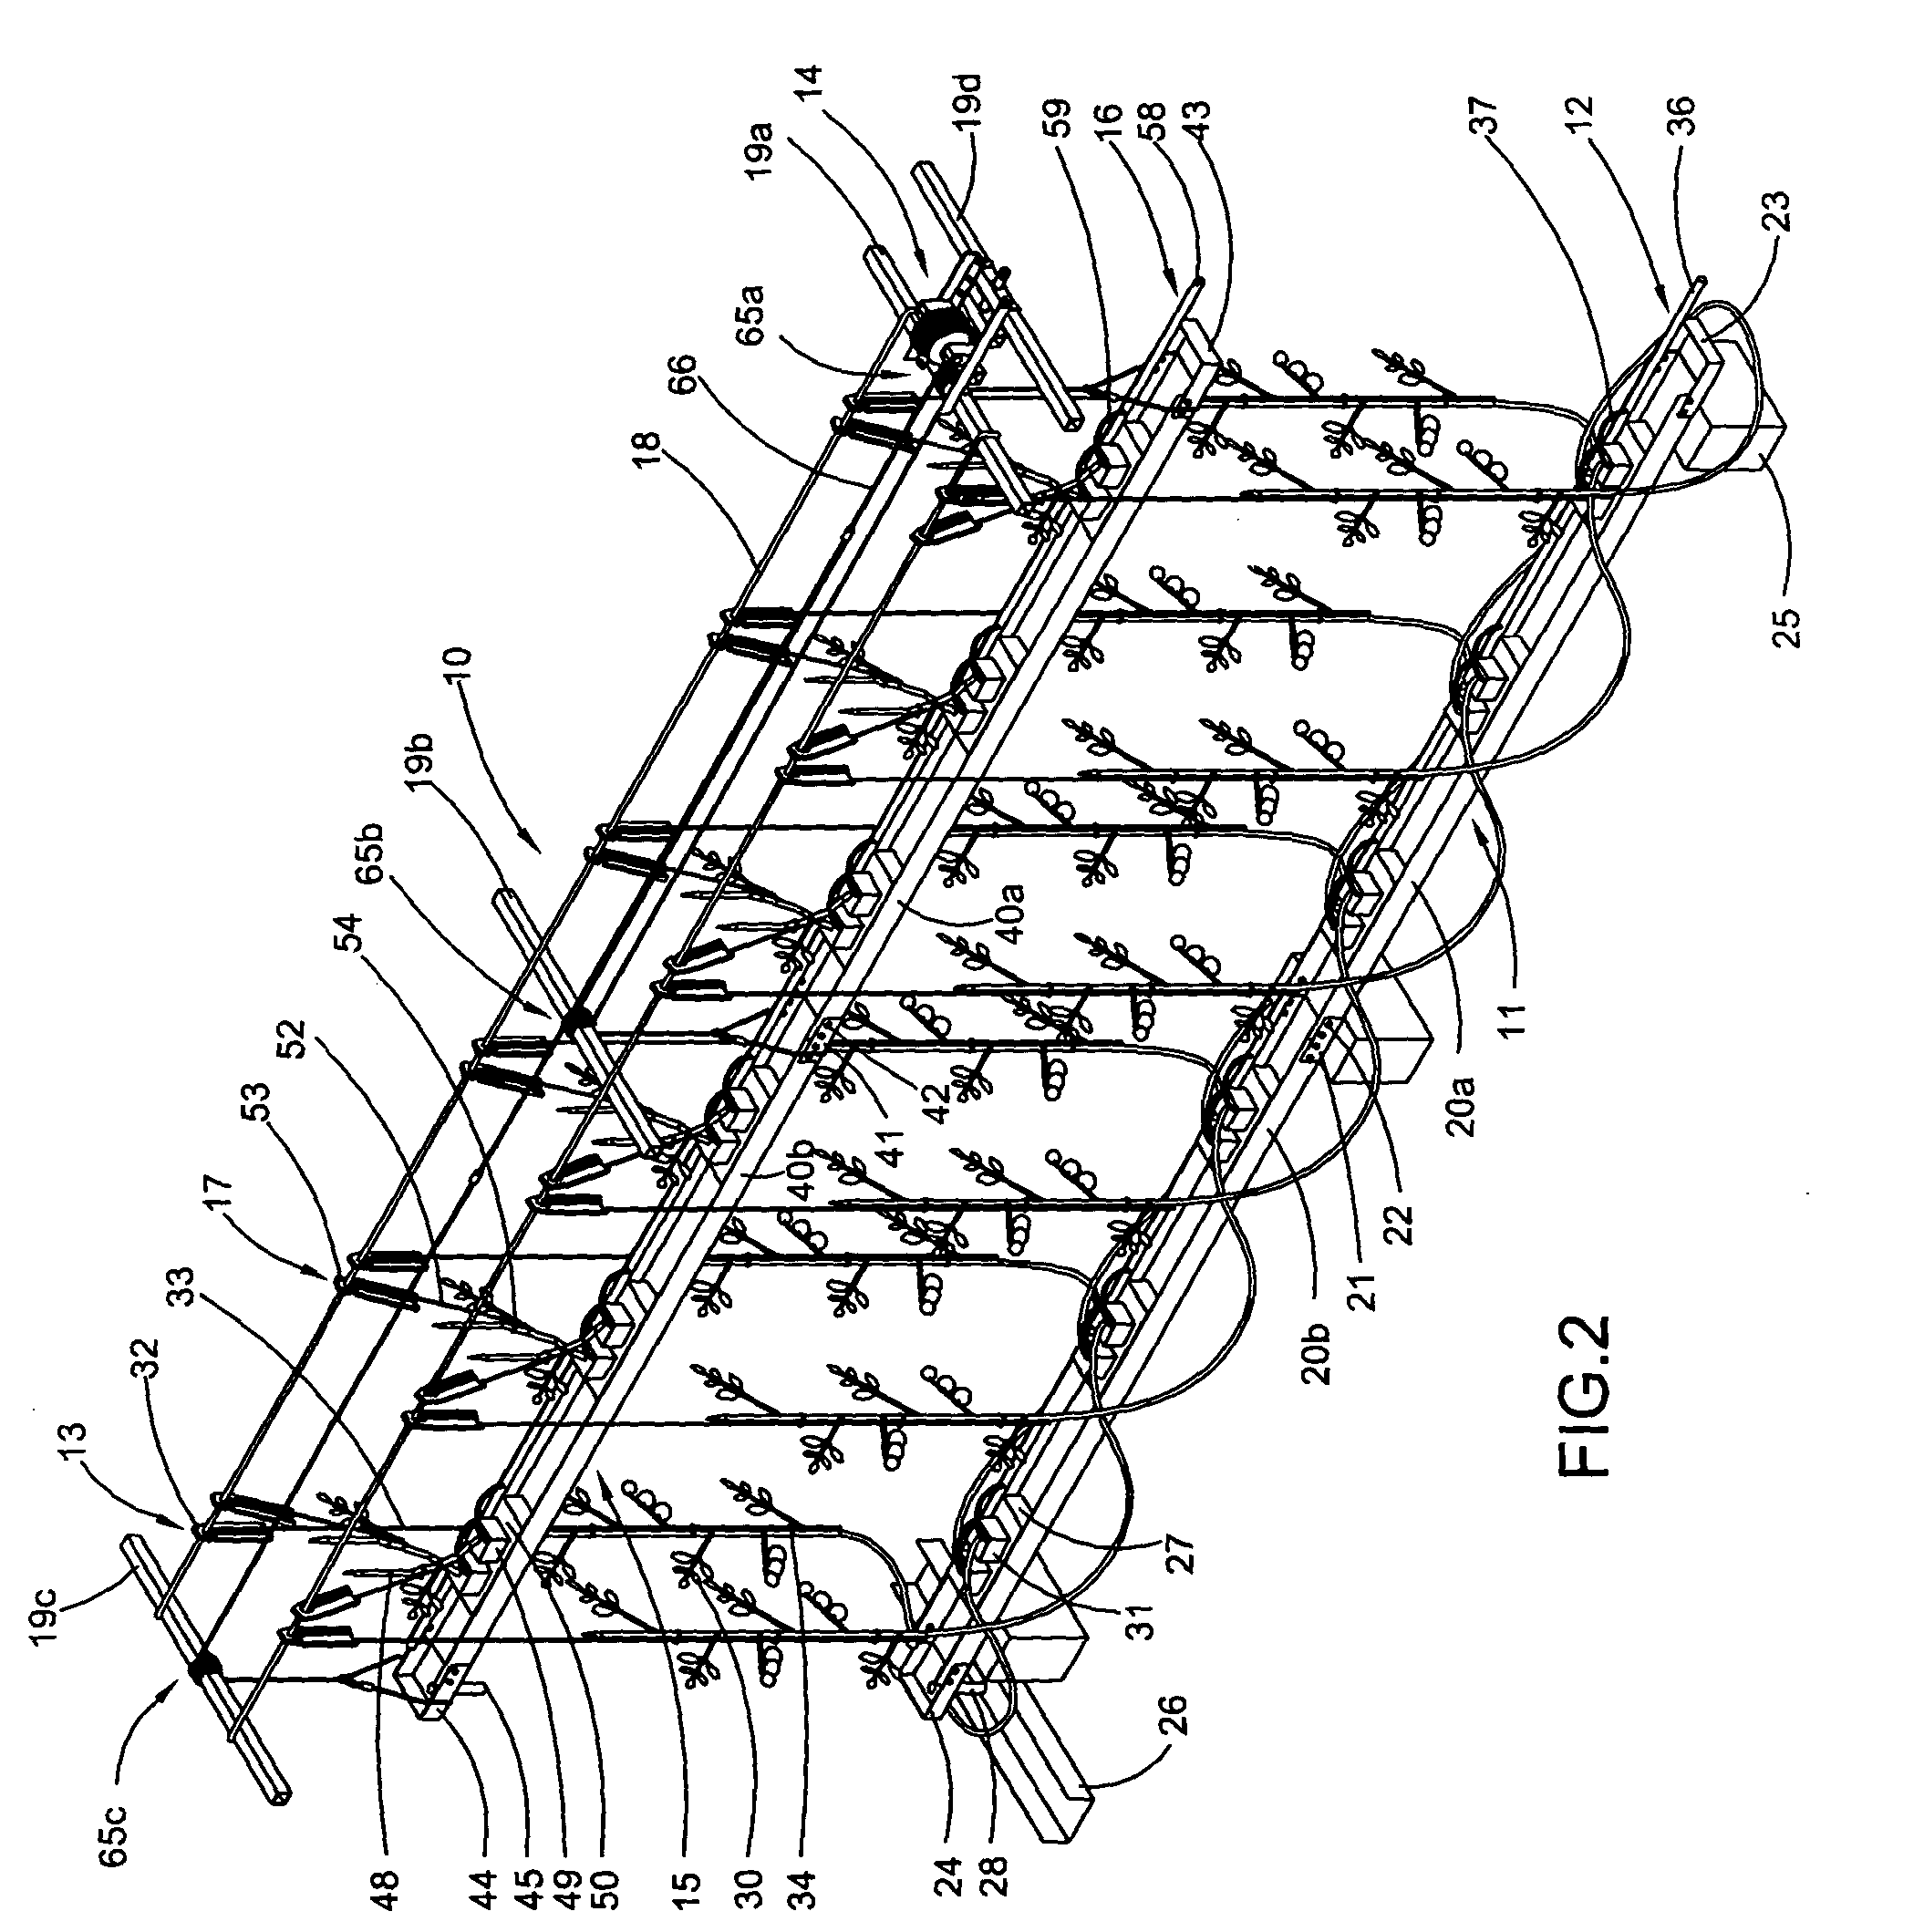 Method and apparatus for growing vine crops in a greenhouse